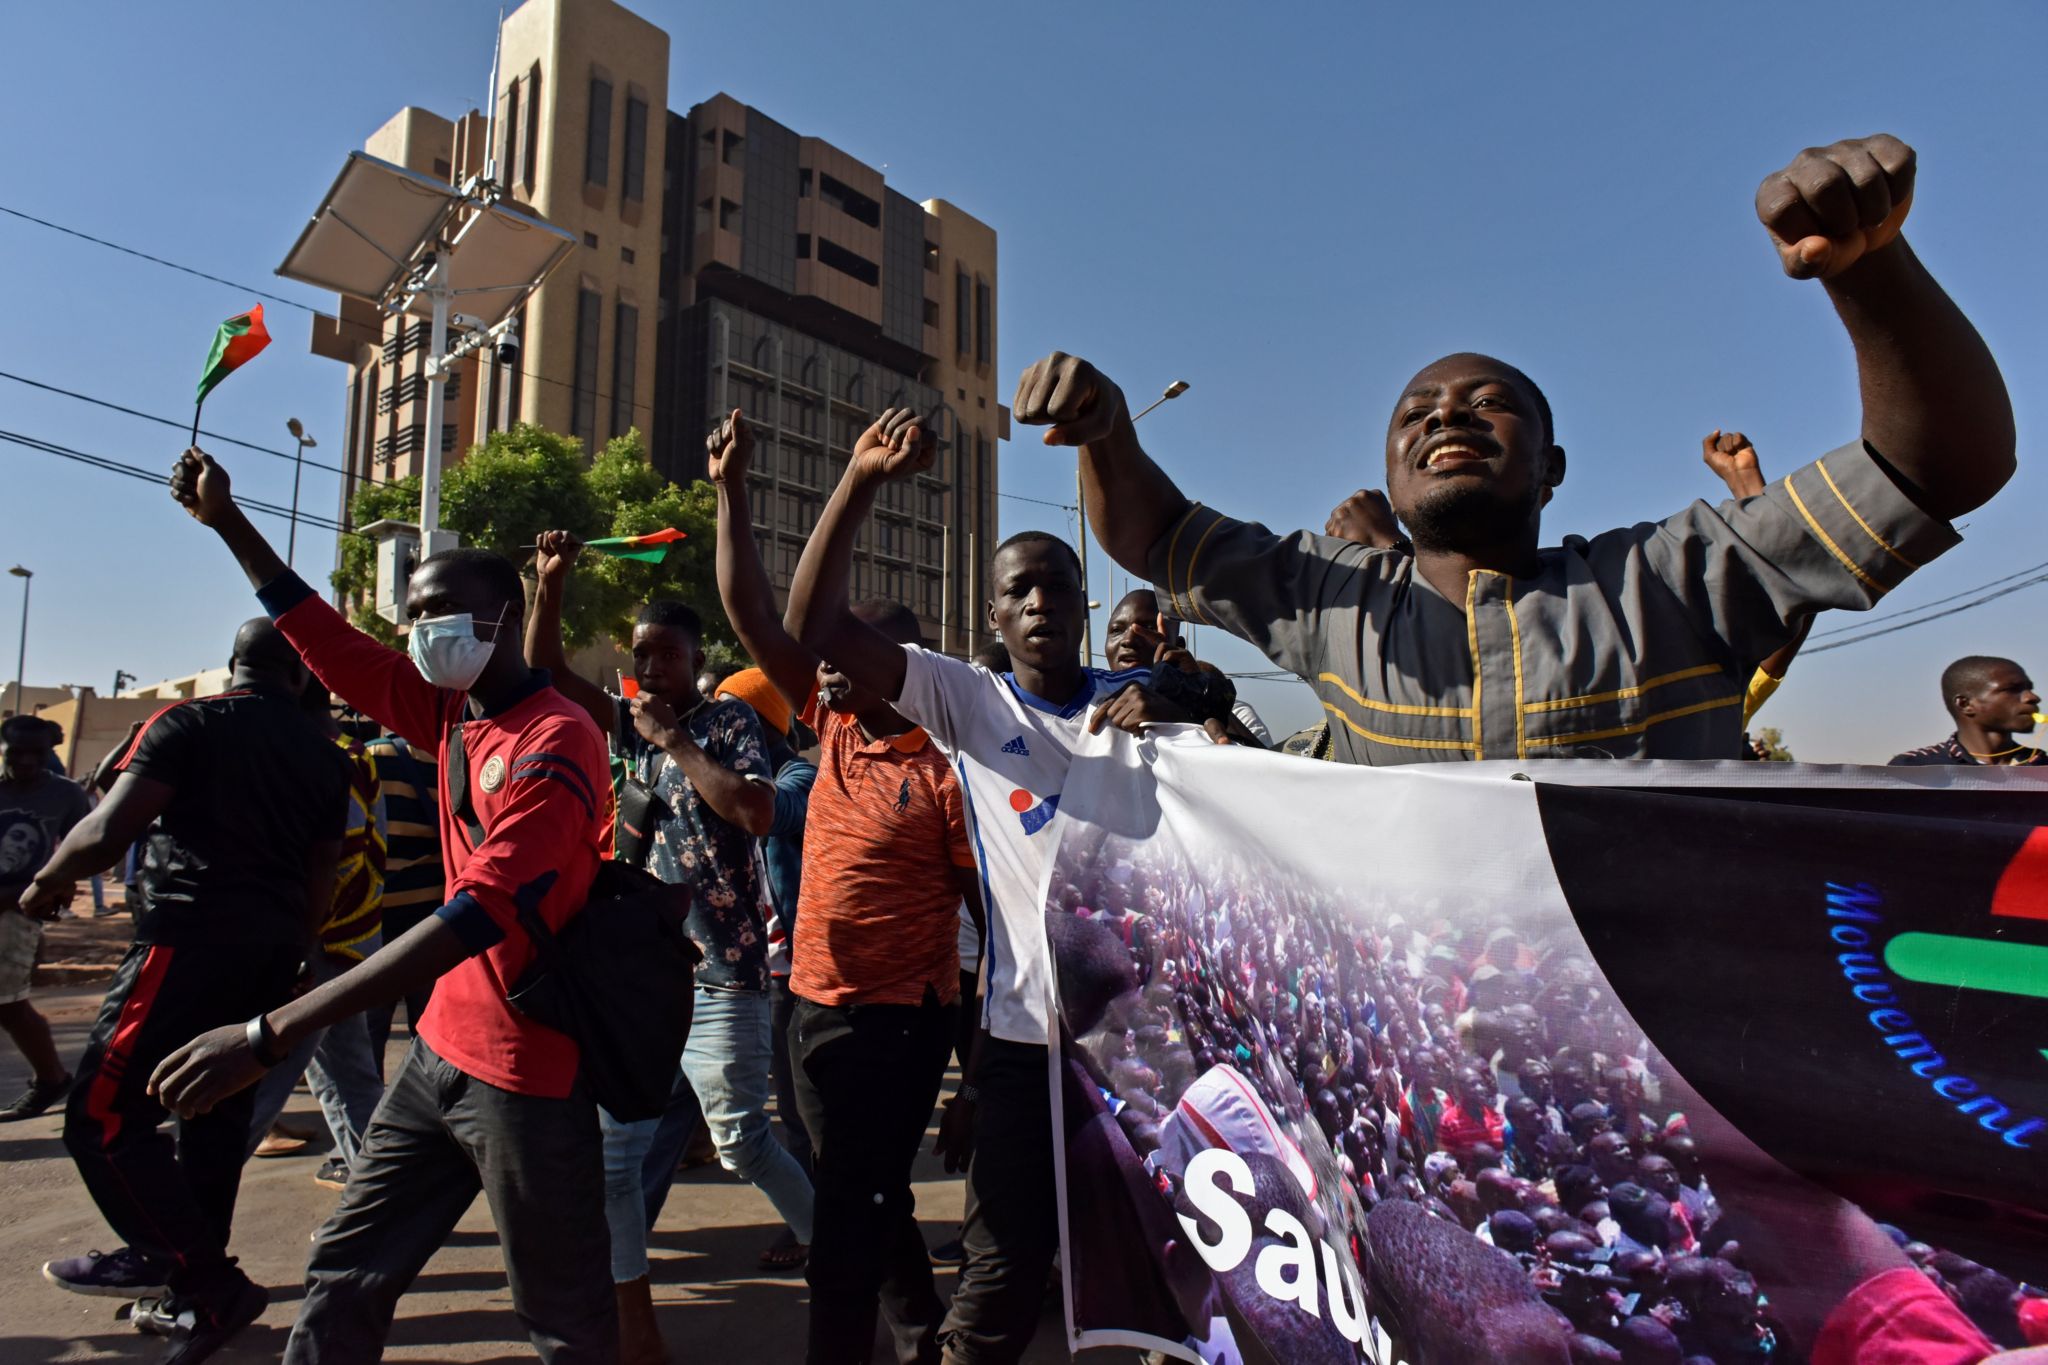 Civil organisations hold a protest calling for Burkina Faso's President Roch Kabore to resign and for departure of French forces that patrol the country, in Ouagadougou, Burkina Faso.